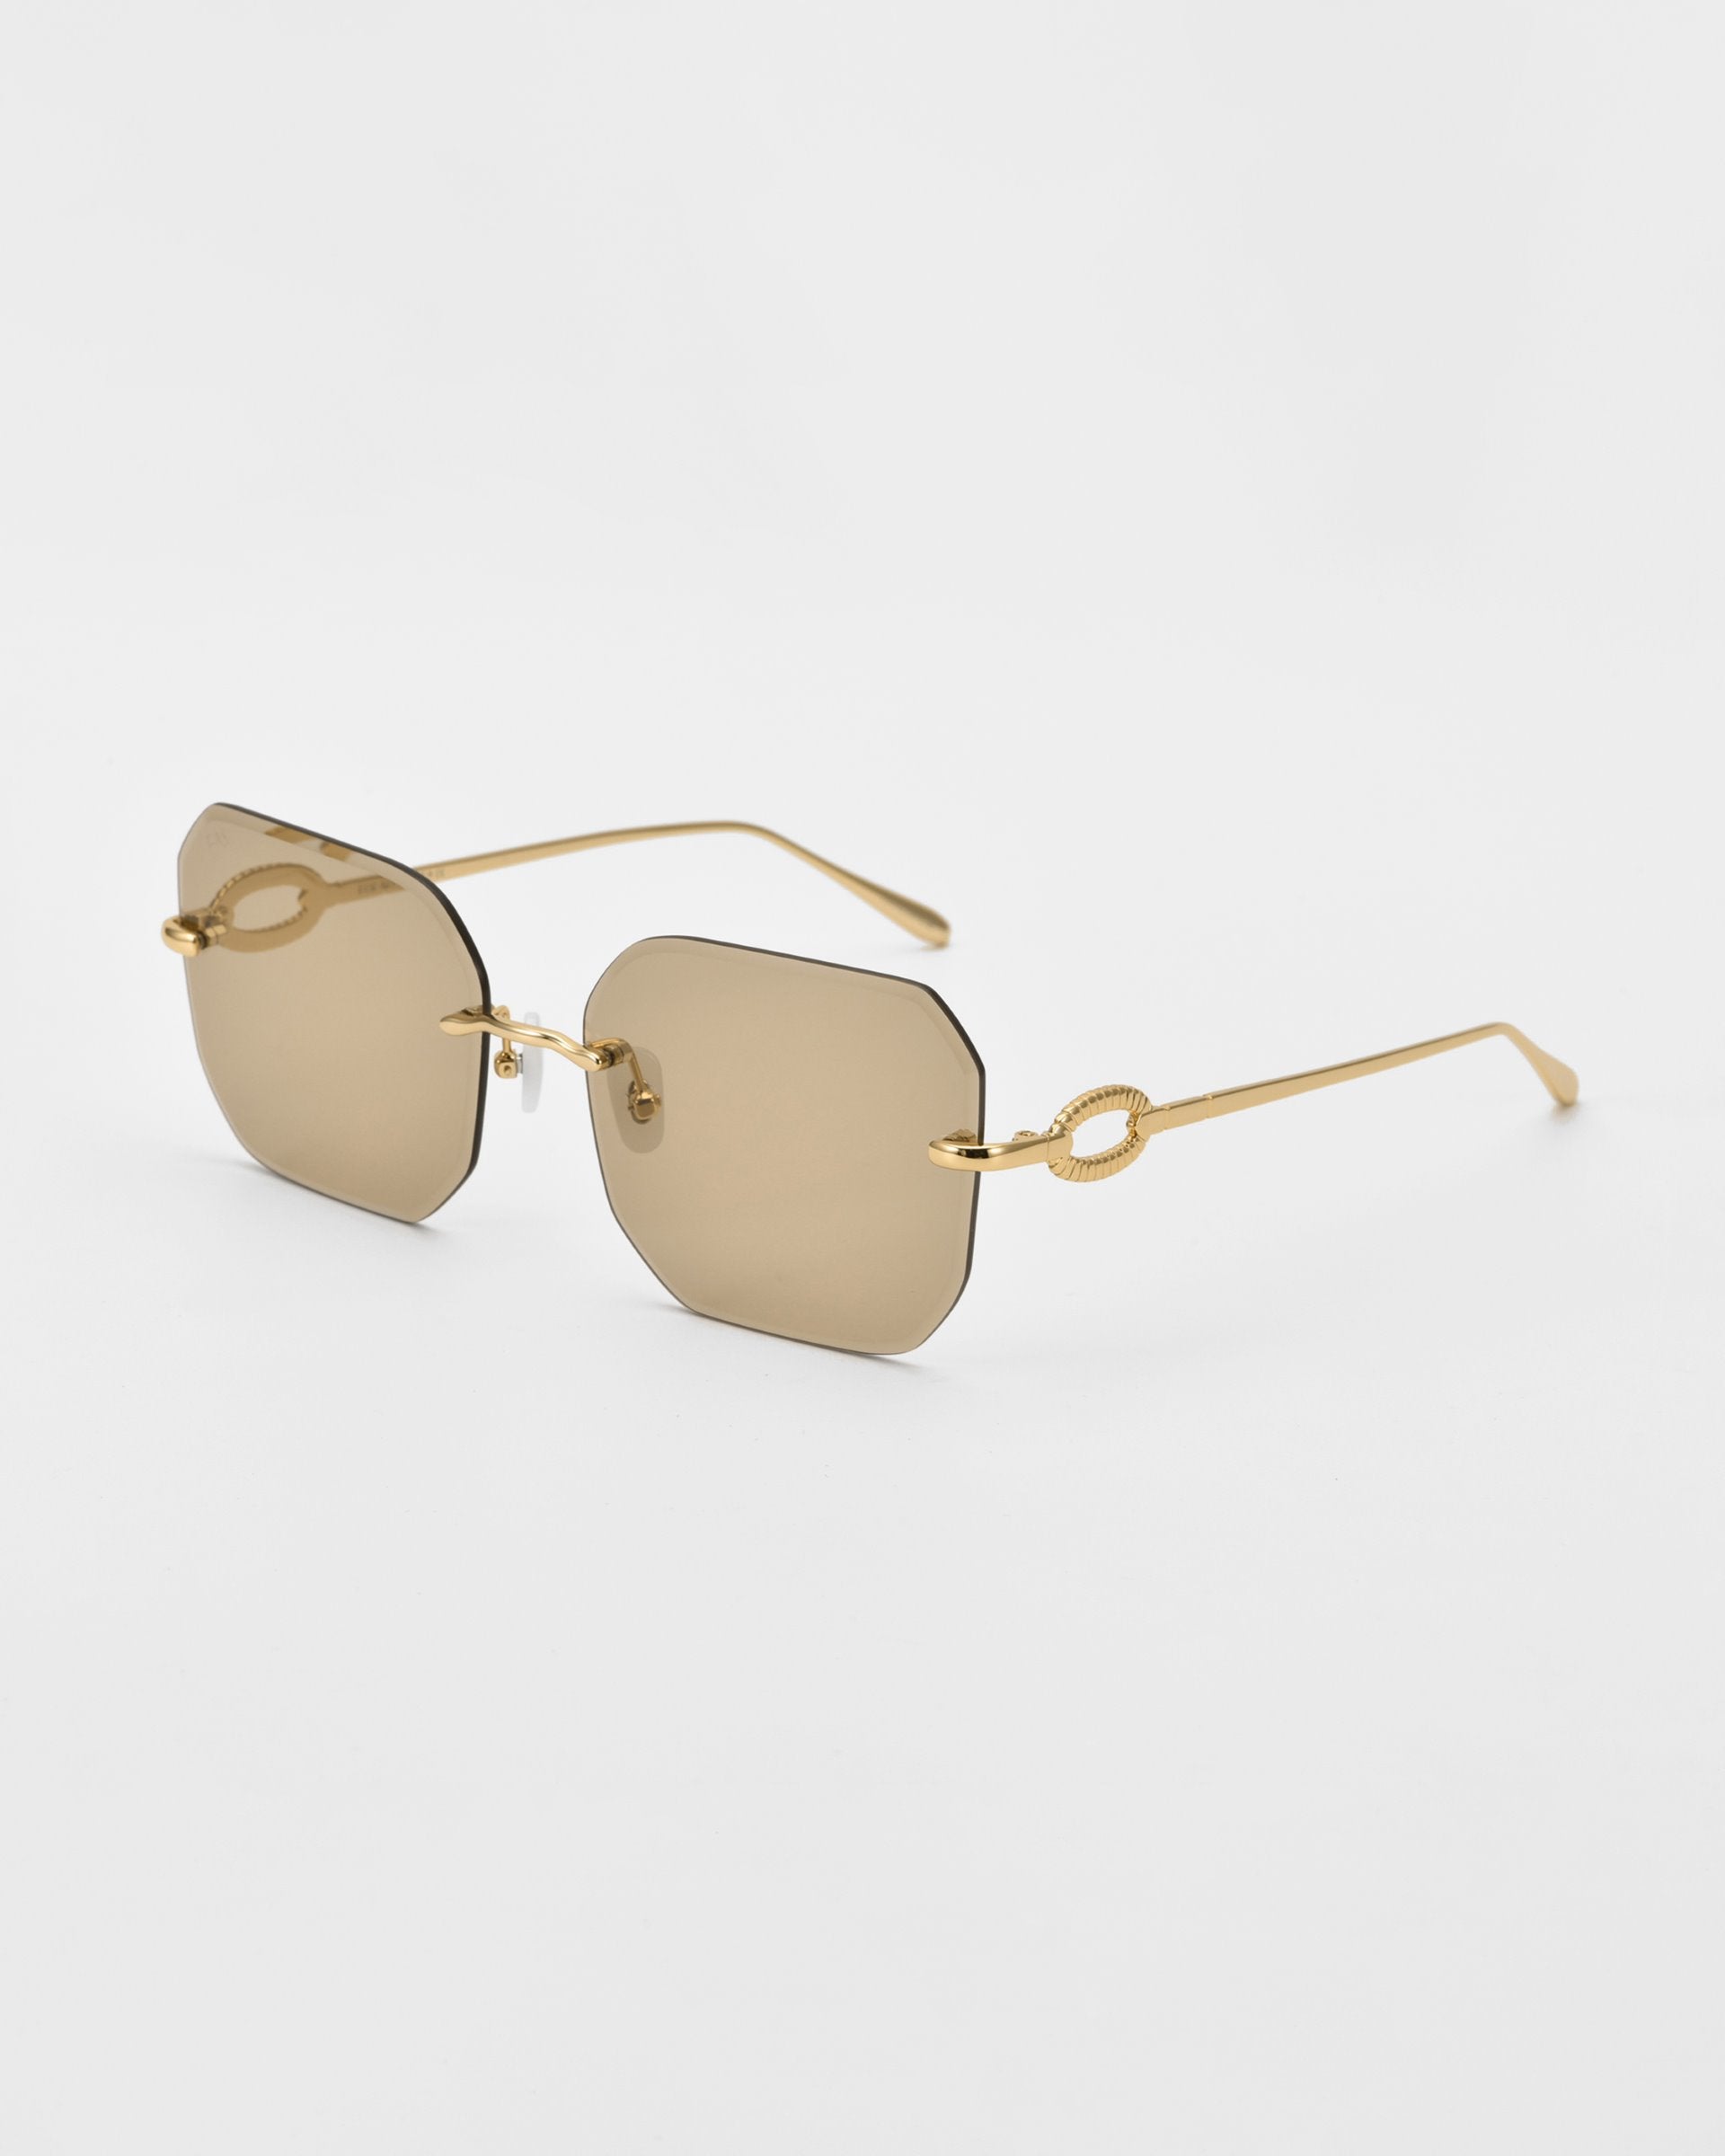 A pair of stylish For Art&#39;s Sake® Aria sunglasses with rimless, square diamond-cut lenses and gold-toned metal arms. The sunglasses feature a minimalist design with an elegant loop detail at the temple, adding a touch of luxury. The lenses have a light brown tint, complemented by jade-stone nose pads.